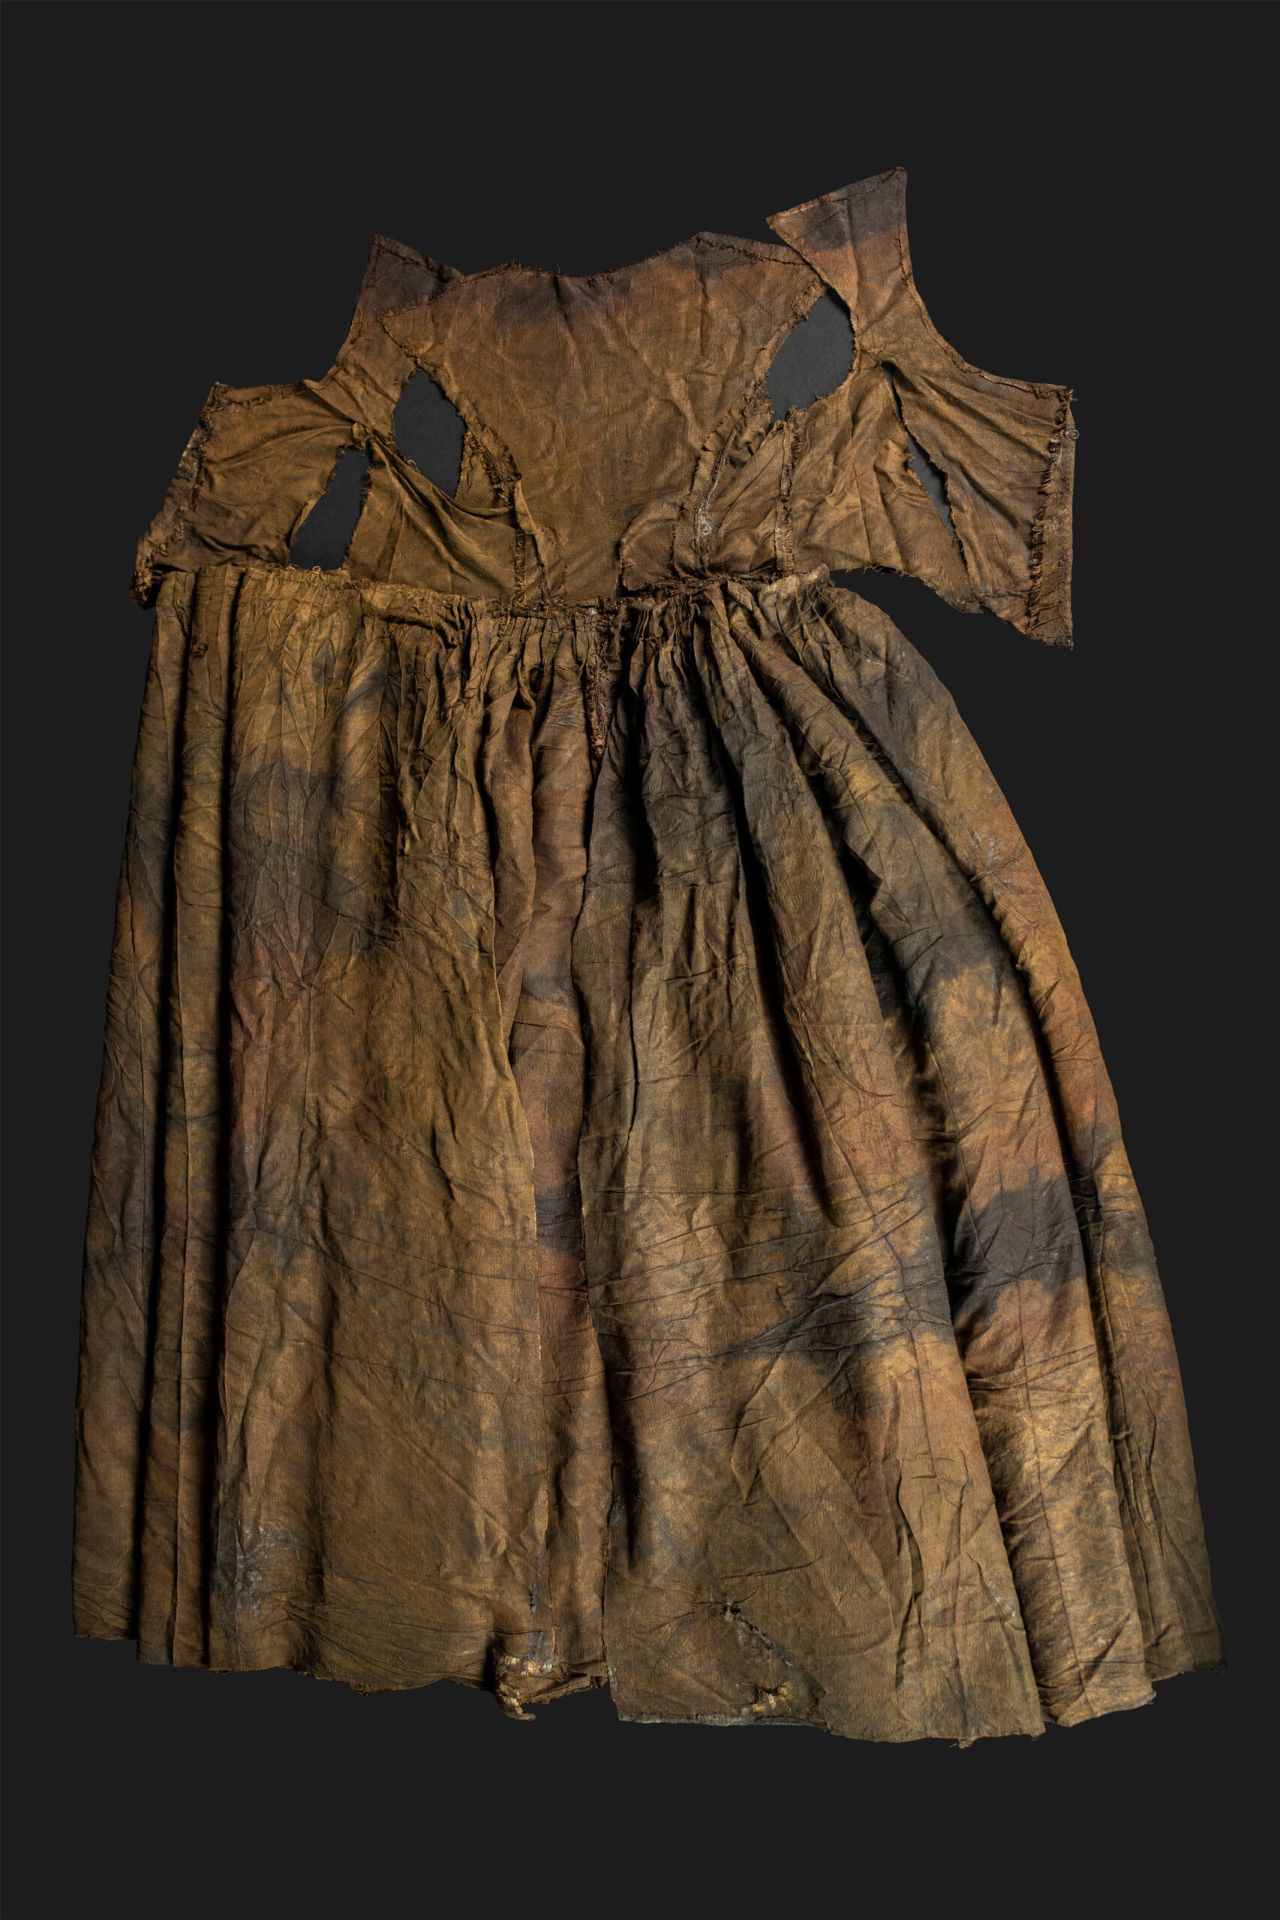 A silk wedding dress interwoven with pieces of silver was recovered from the same chest as the other silk dress. The two dresses are different sizes, suggesting the clothing belonged to a family rather than one person.